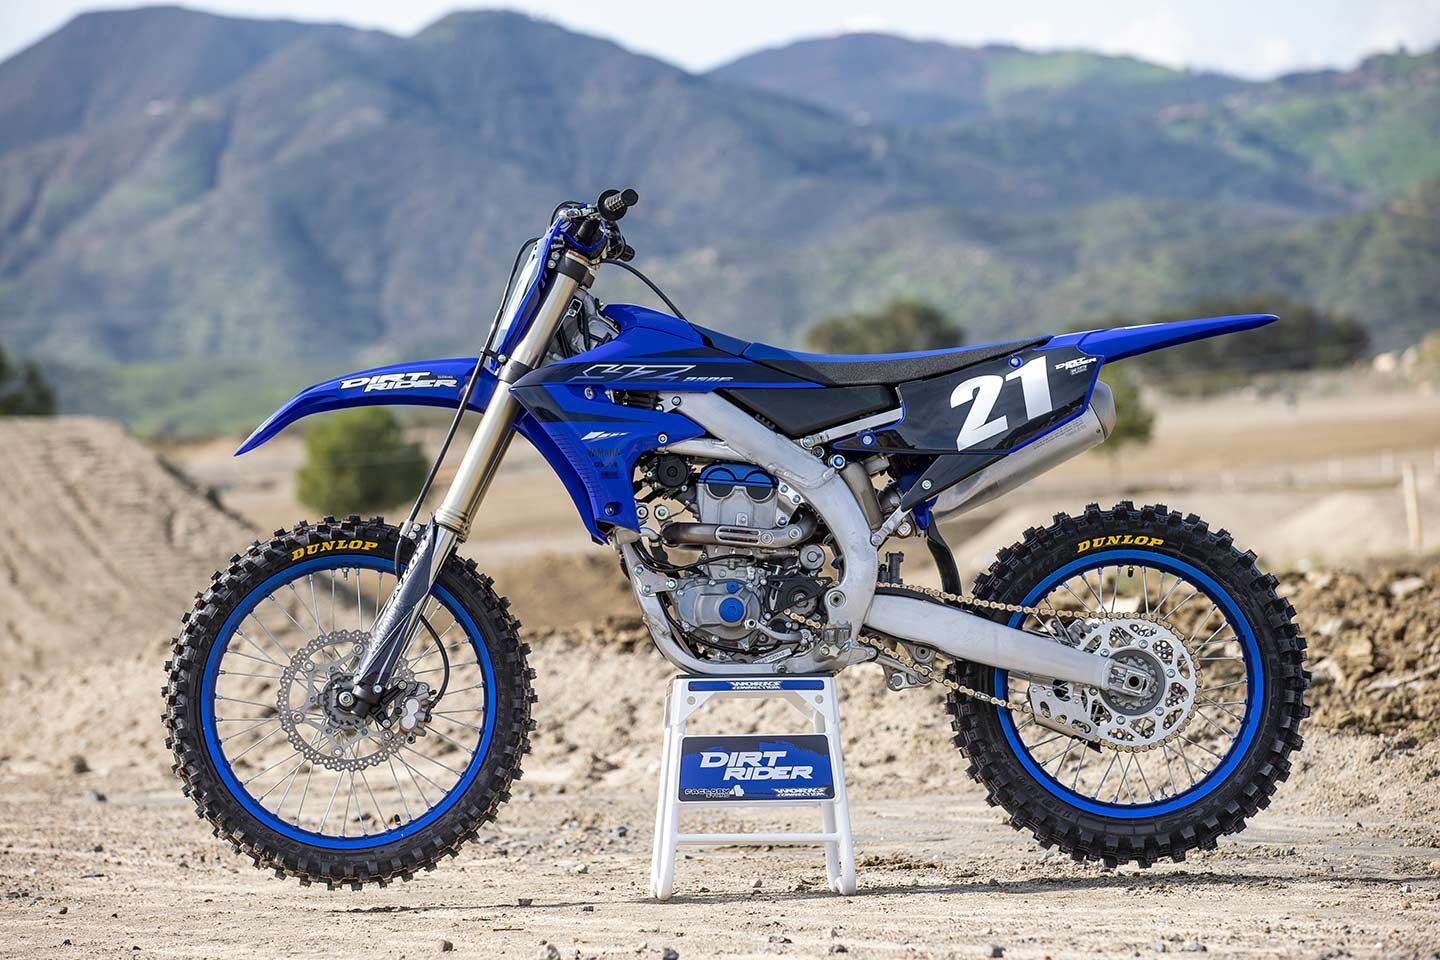 “In addition to being very fun to ride, the YZ250F is also a great racebike, especially in a stock class!”  <i>—Tanner Basso</i>